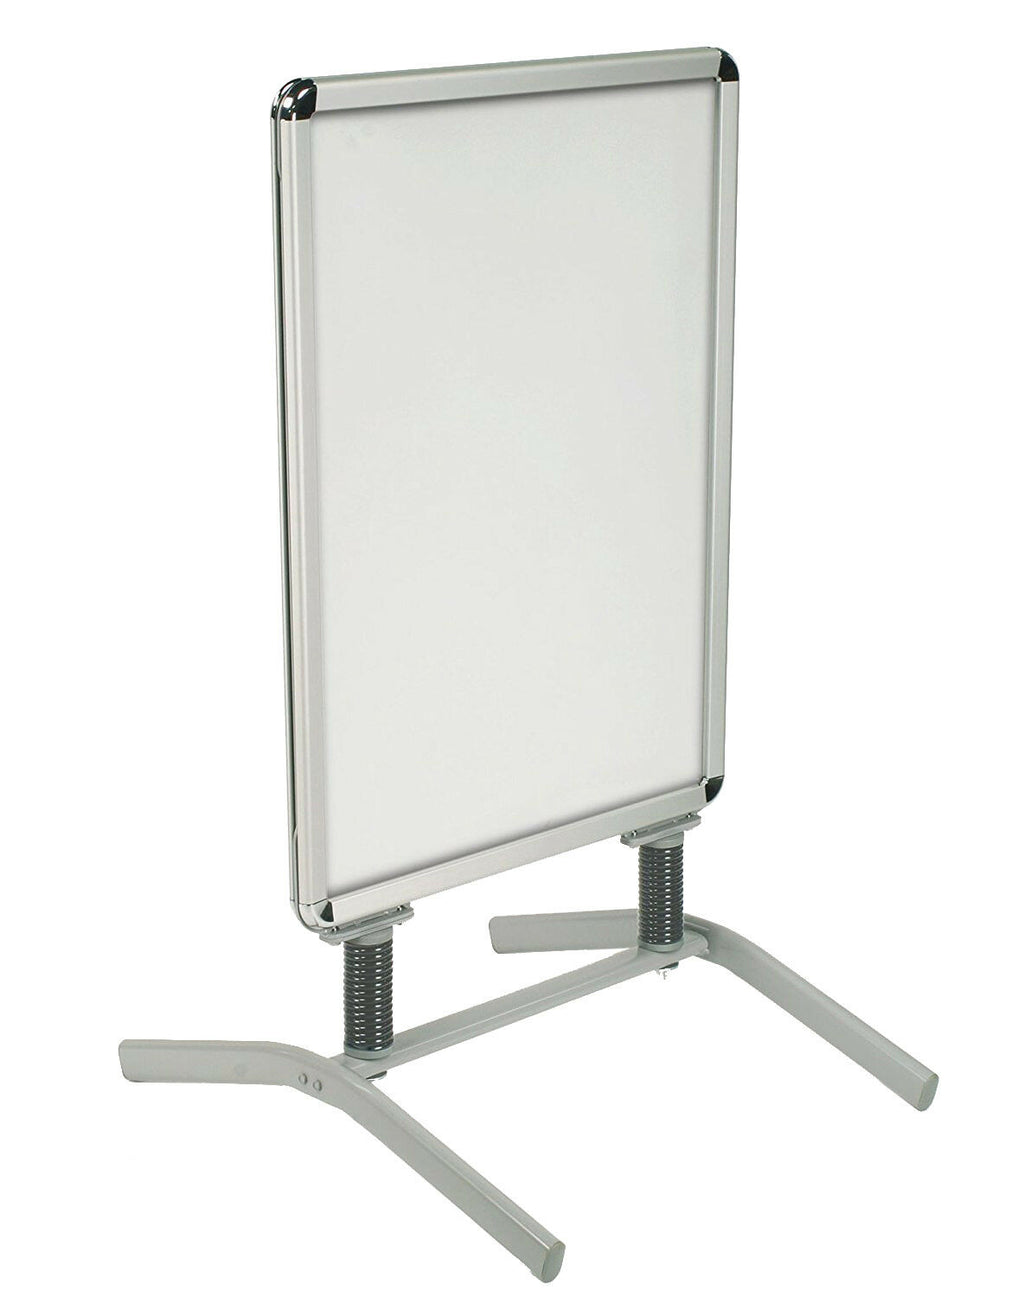 Outdoor A1 Double Sided Snap Frame Advertising Poster Stand Display Board V2.0 H-base